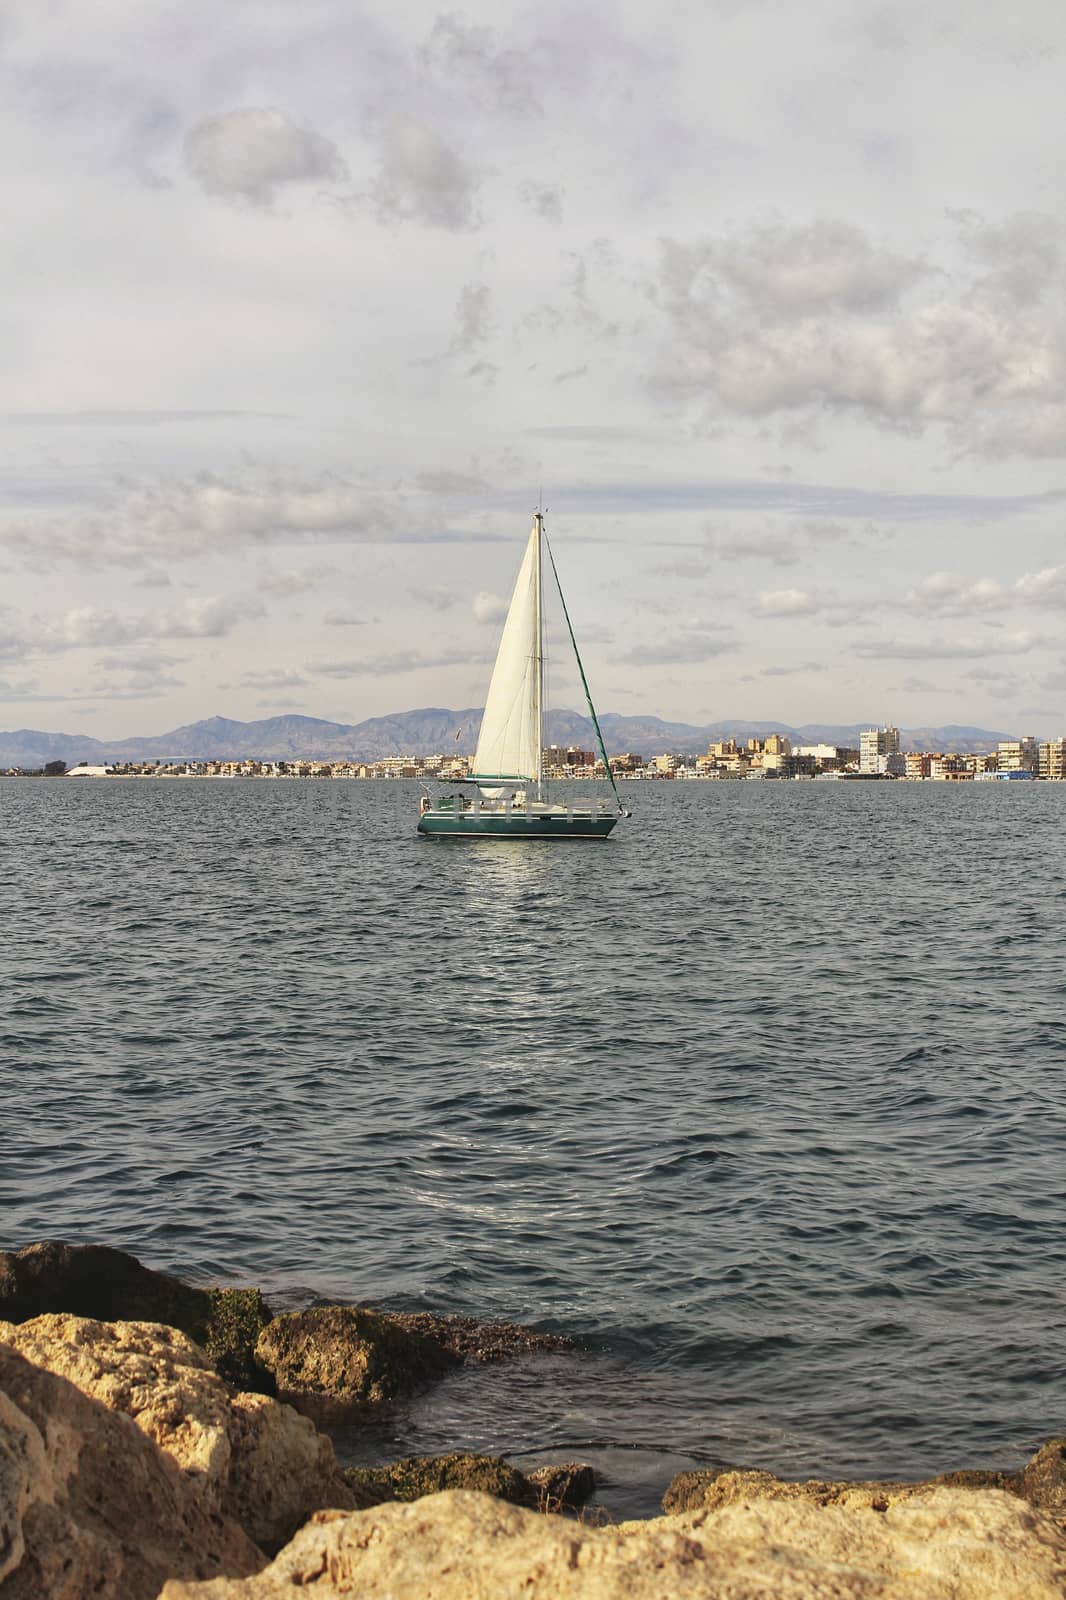 Sailboat entering the port by soniabonet